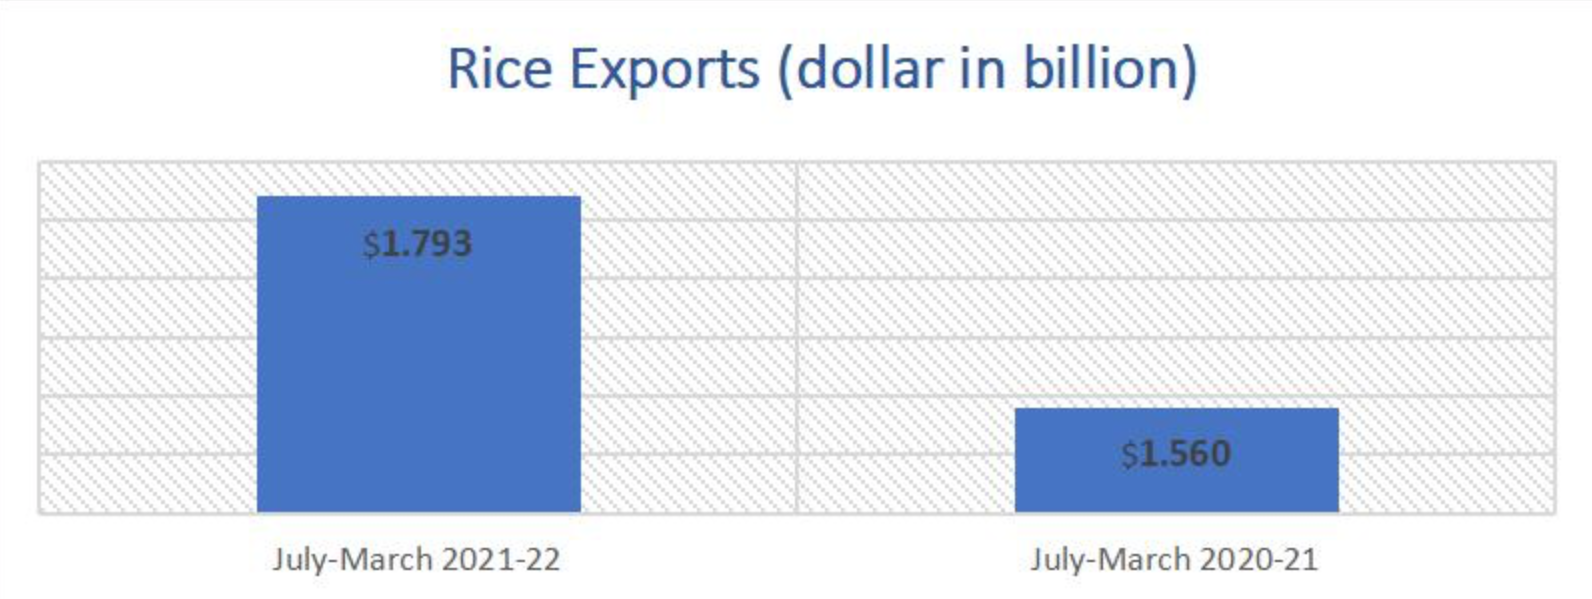 Rice exports climb to $1.793b in first three quarters